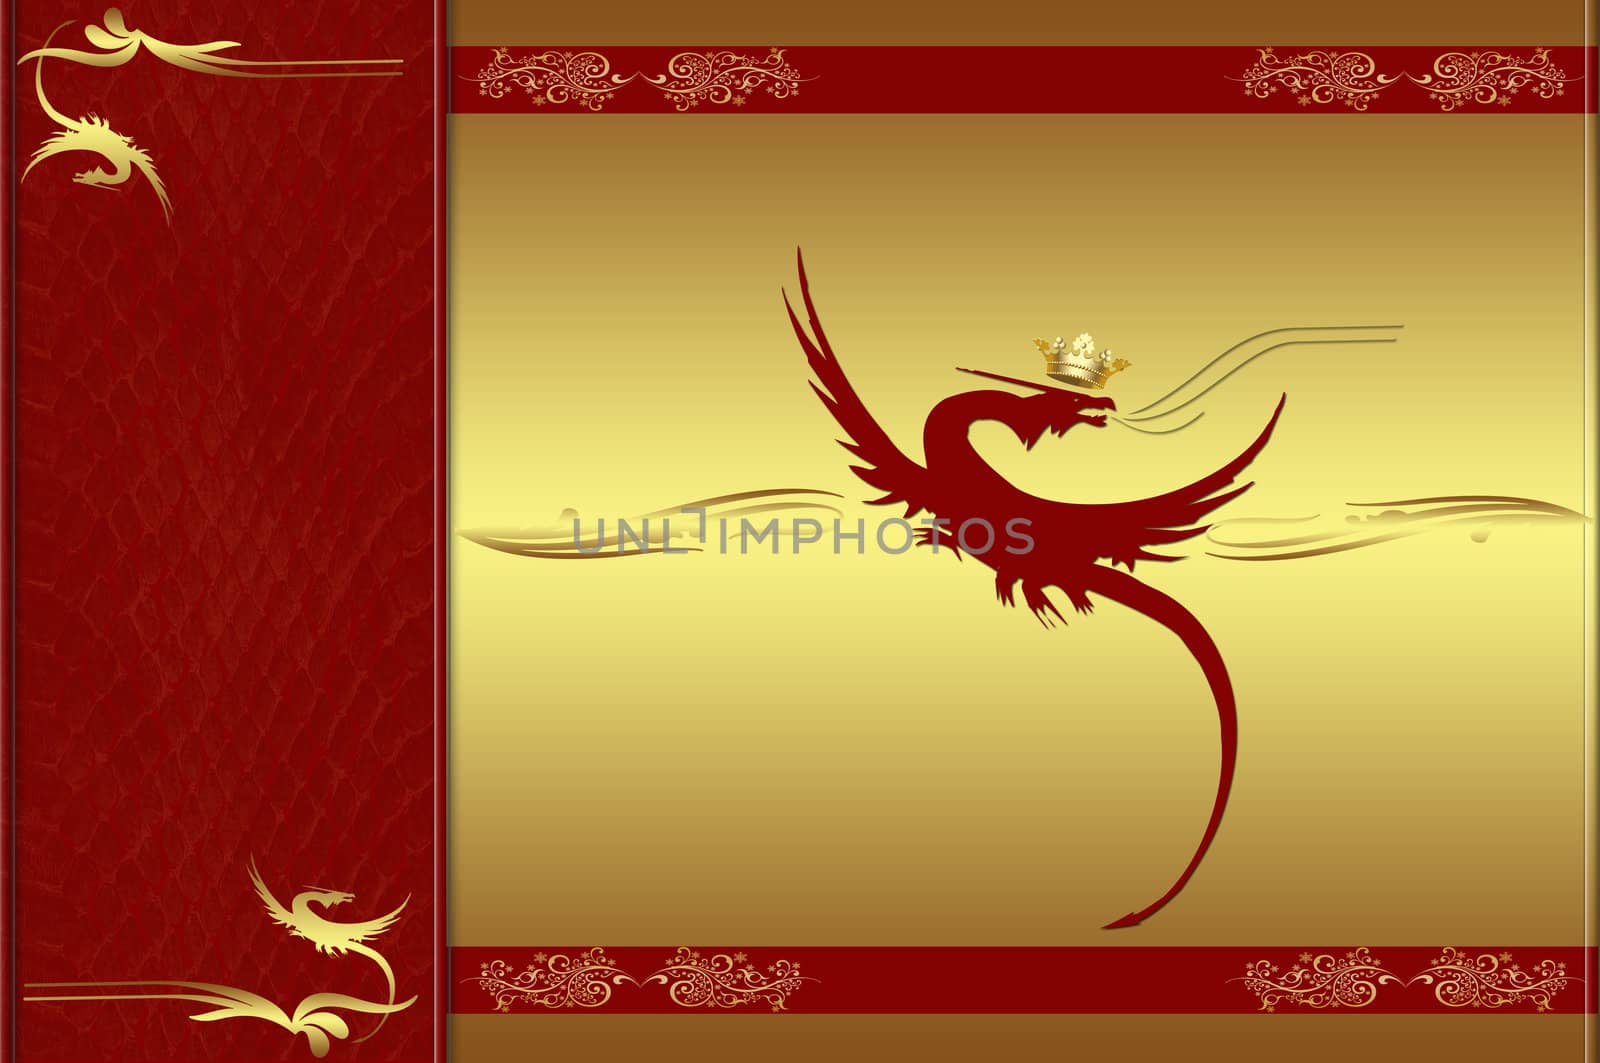 Golden background with red dragon and others decorative elements